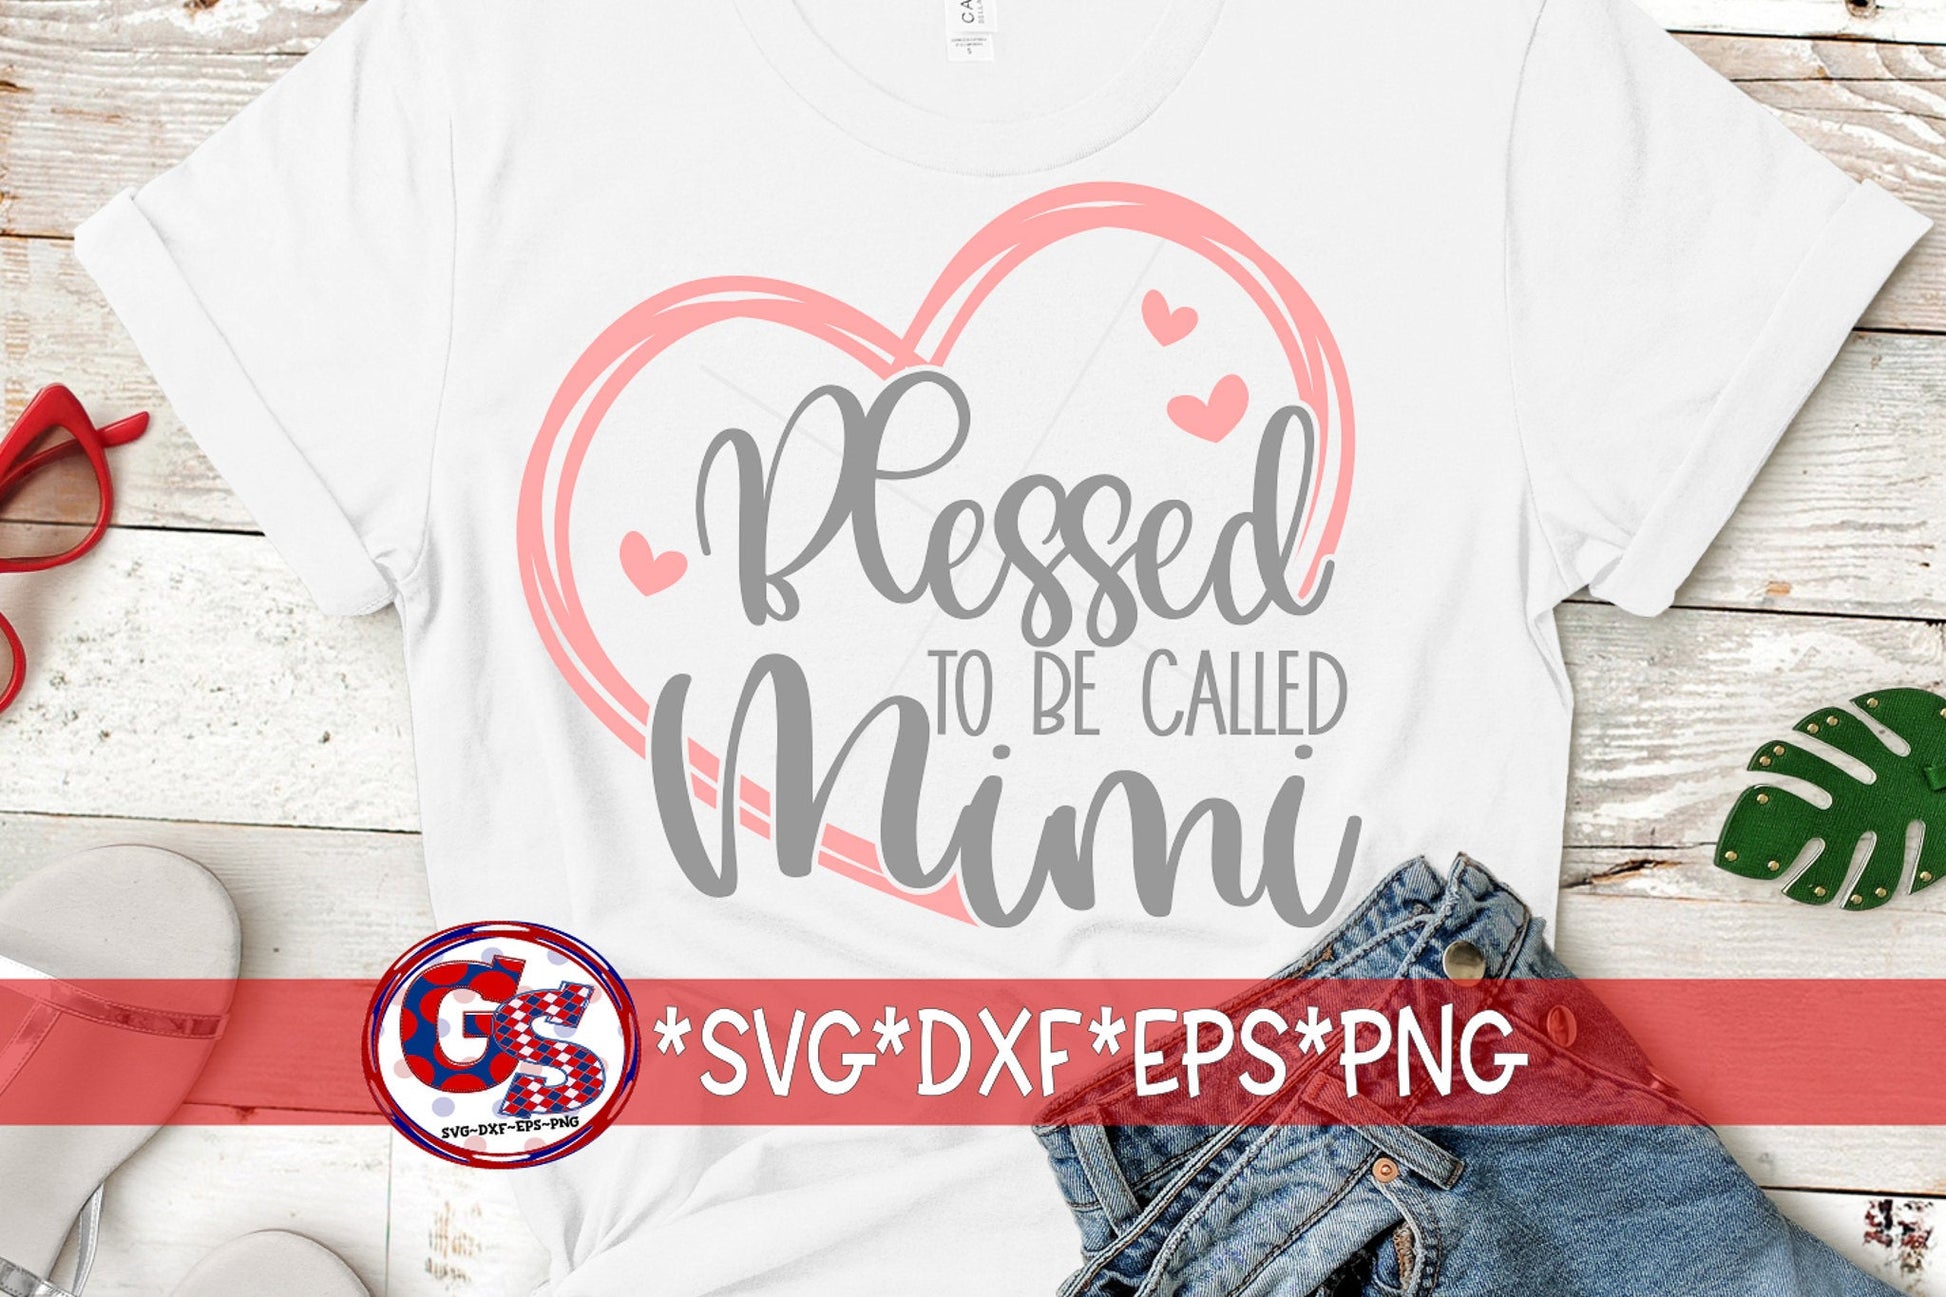 Blessed To Be Called Mimi SvG | Mother&#39;s Day SVG | Mimi EpS | Mimi SVG | Mimi DxF | Blessed Mimi svg dxf eps png. Instant Download Cut File